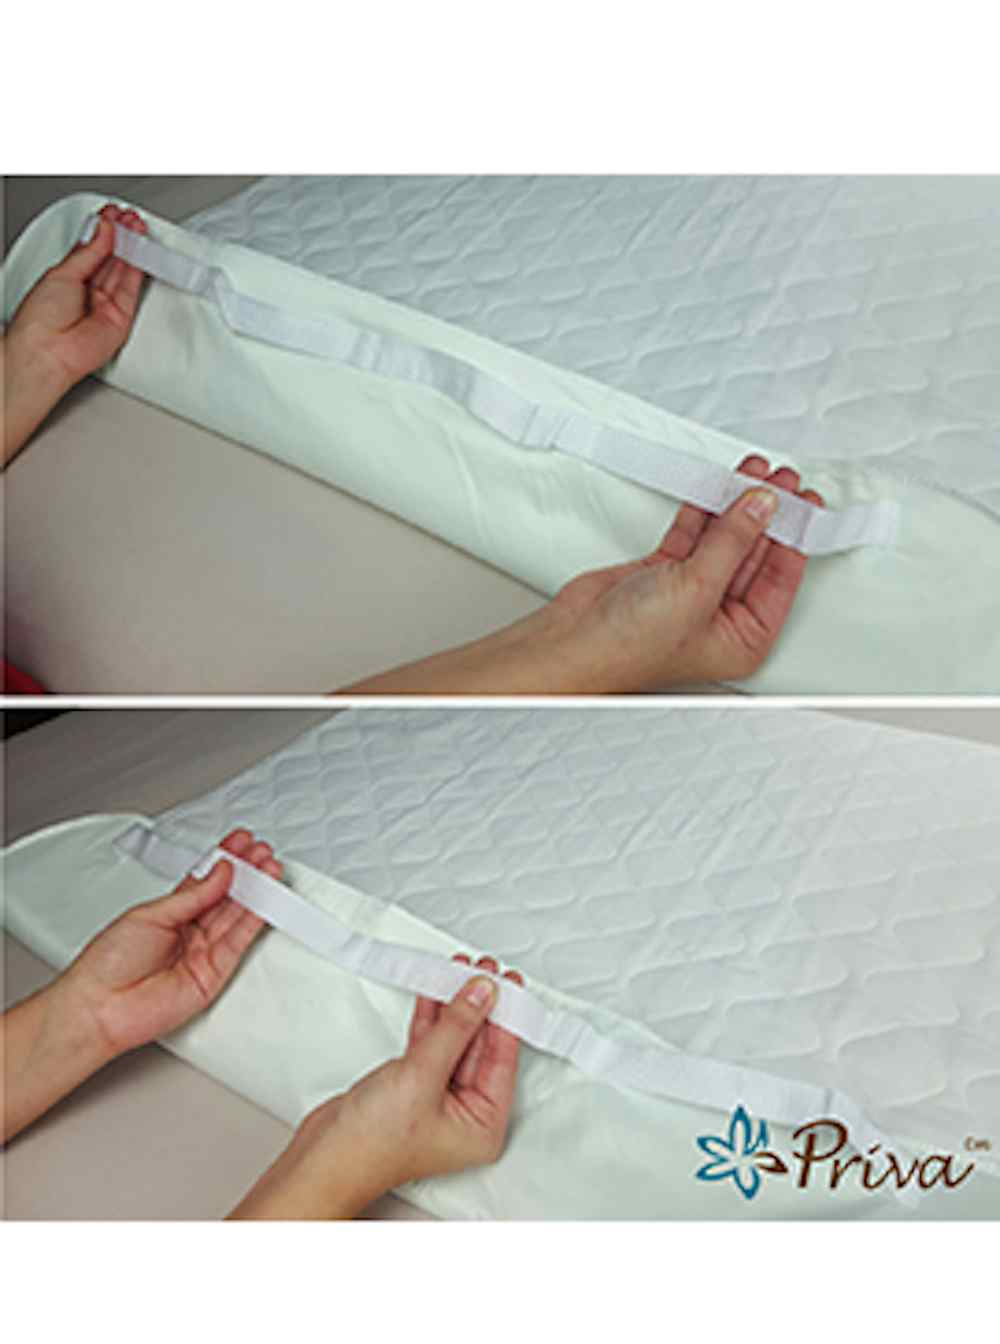 Priva Waterproof Sheet Protector with Handles, A12605HAND